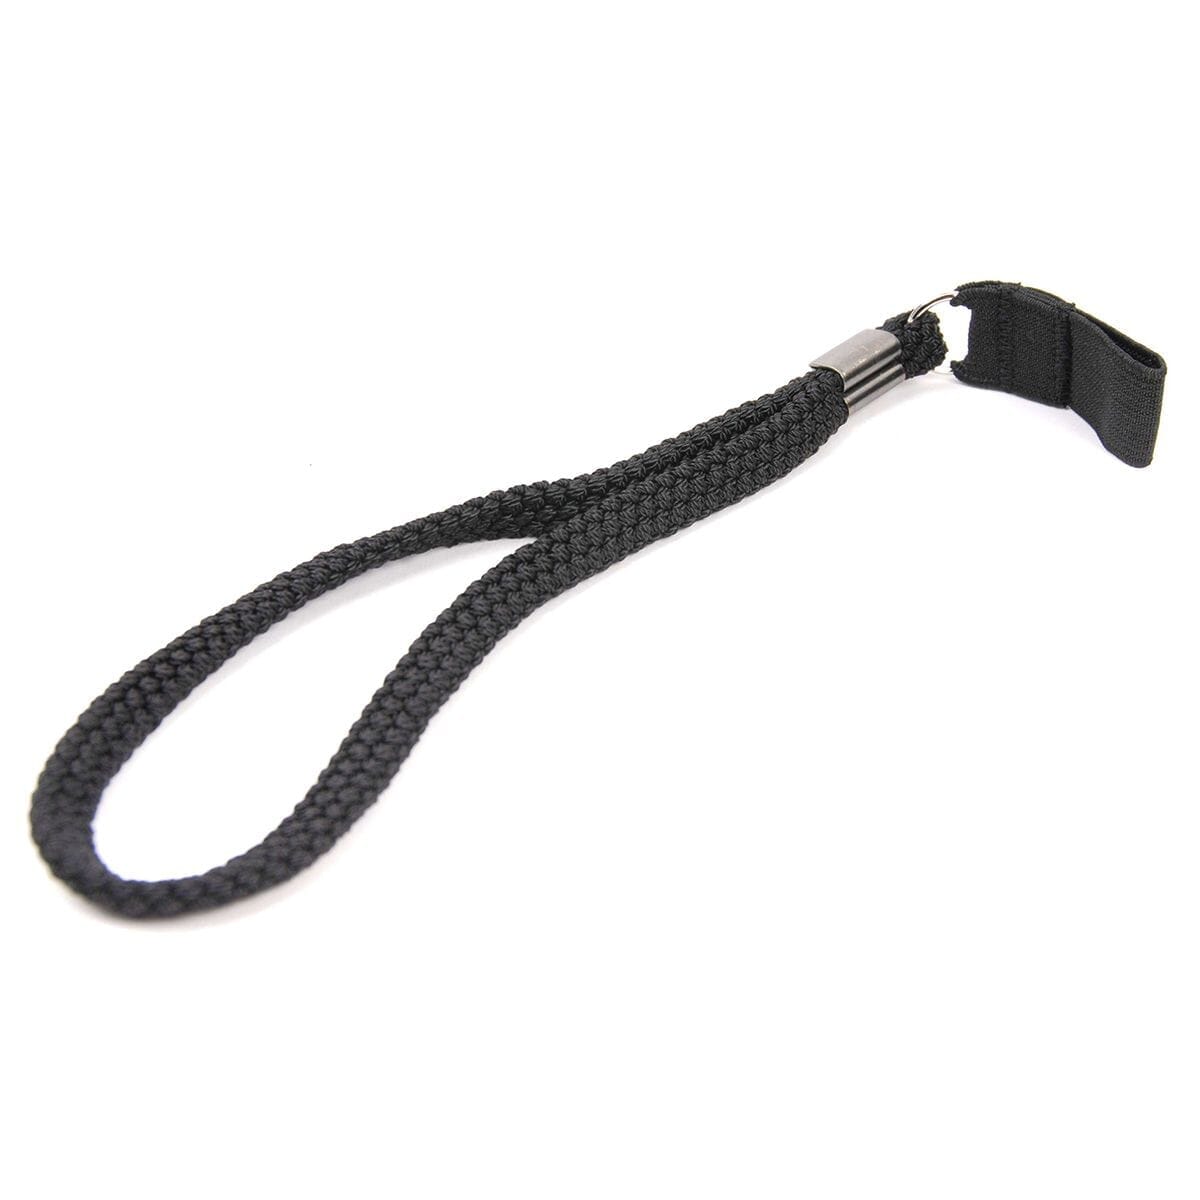 View Wrist Strap Pack of 3 information